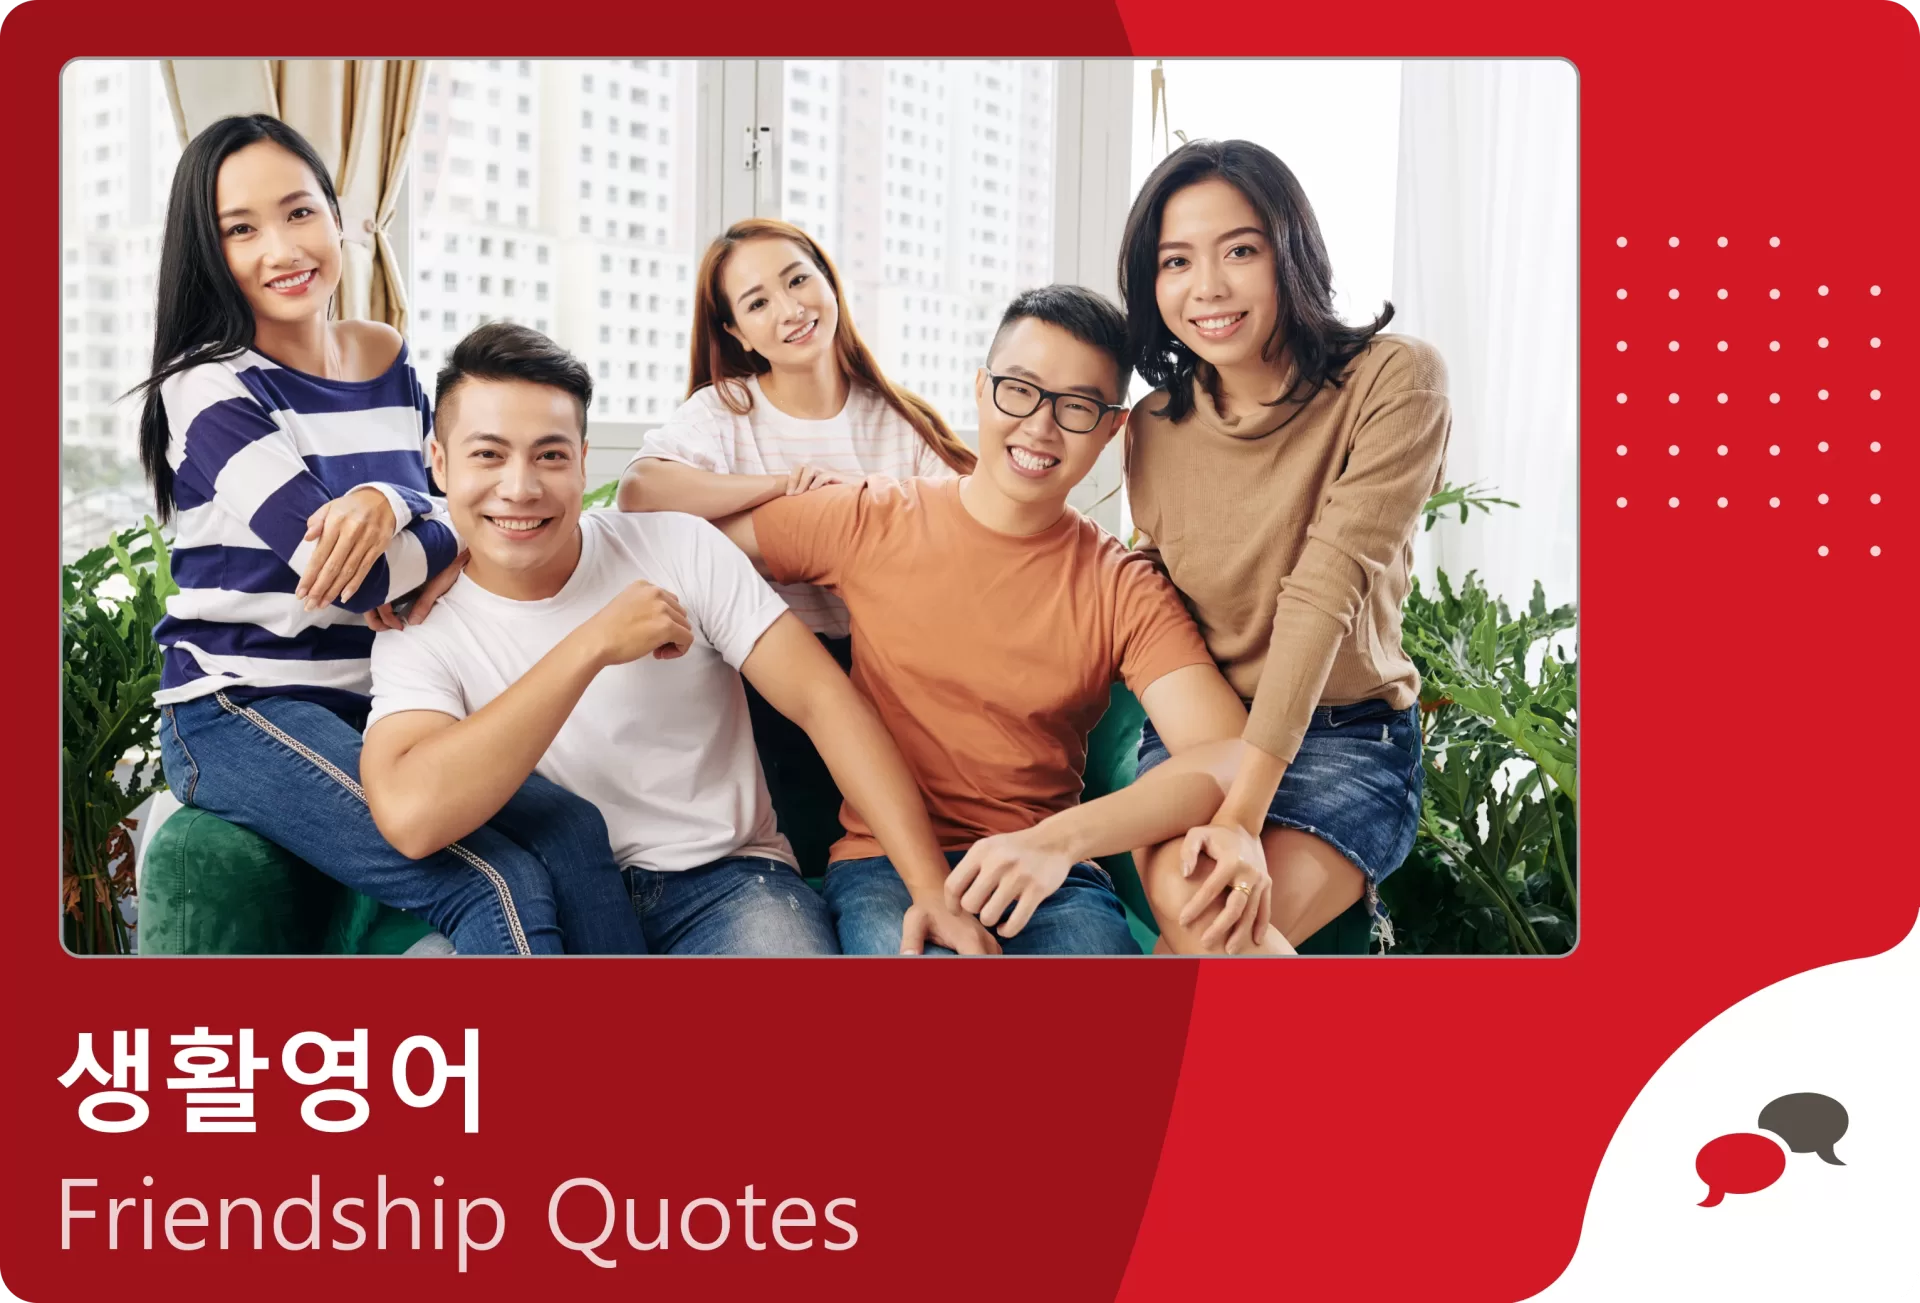 Friendship Quotes And Meanings In English.webp